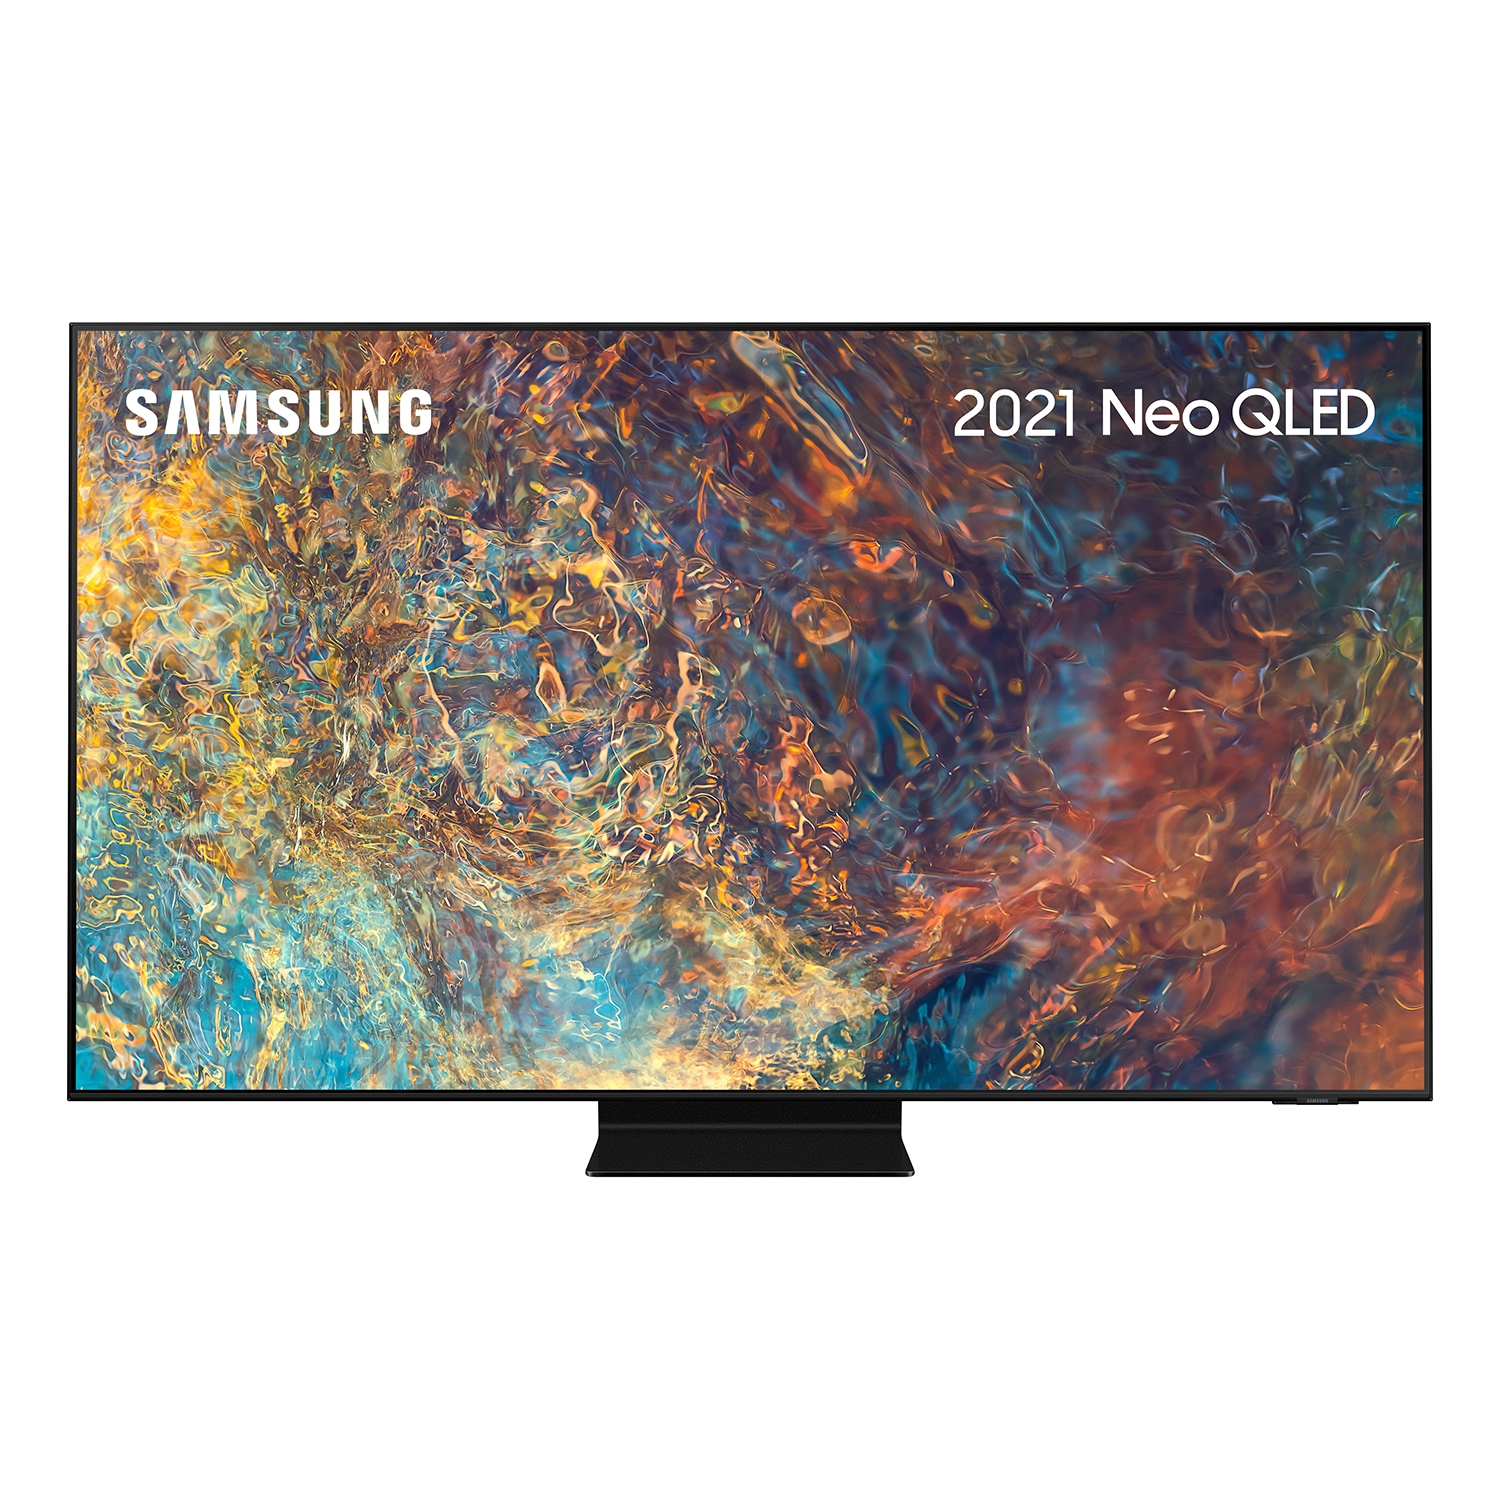 Samsung QE65QN90AATXXU 65" 4K Neo QLED Smart TV Quantum HDR 2000 [1500] powered by HDR10+ with Wide Viewing Angle - 0